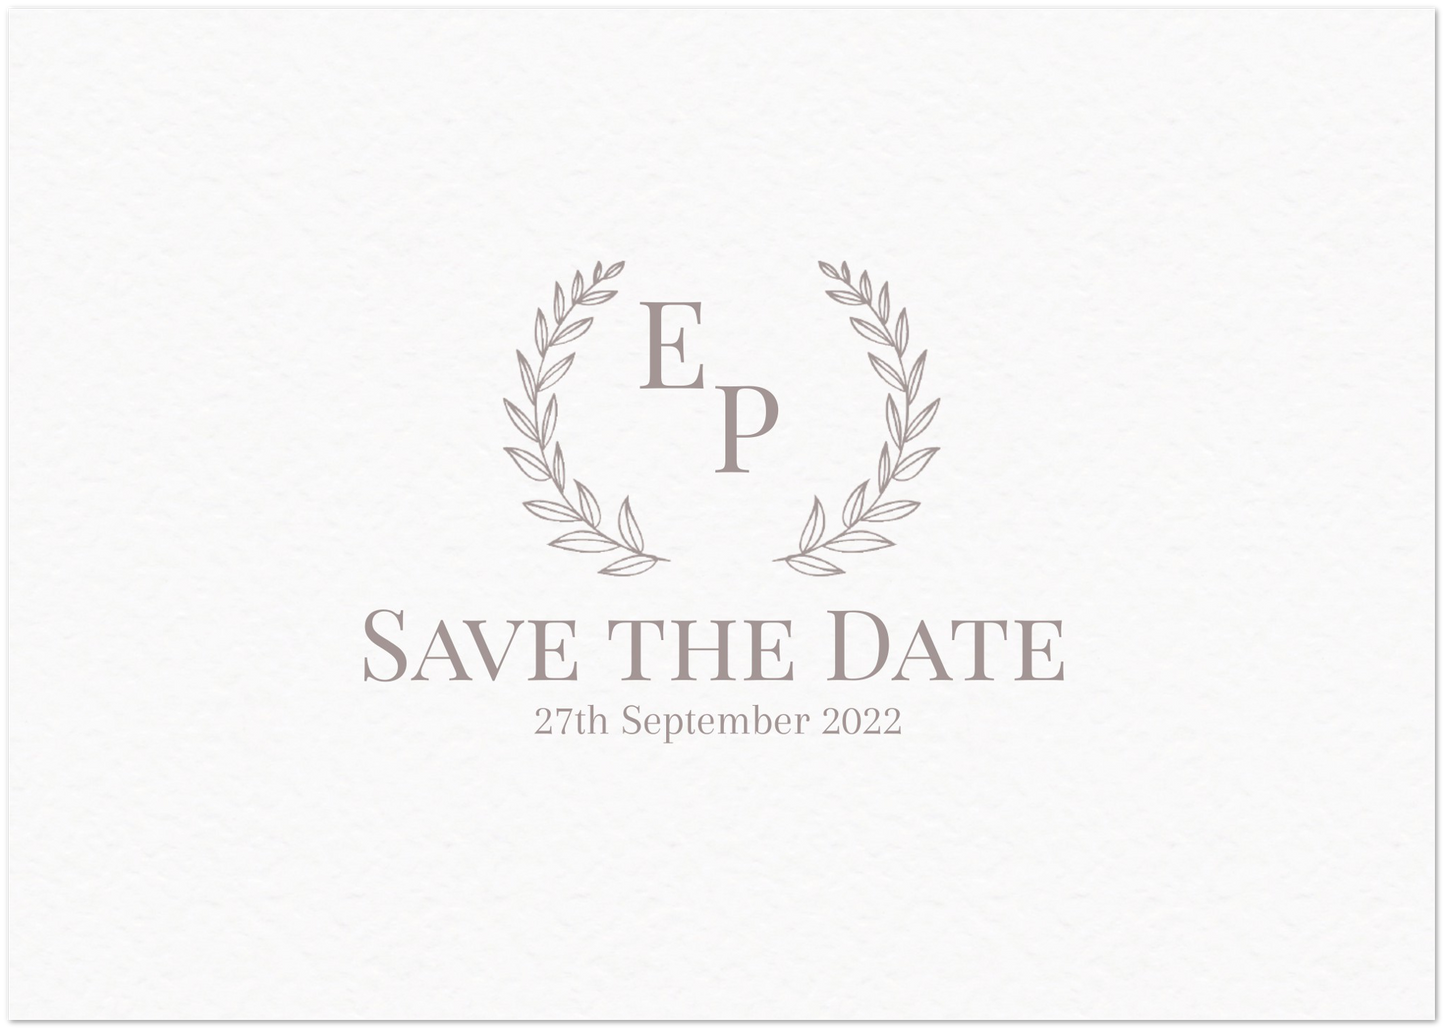 Classic Emblem Save the Date (sold as packs of 10 cards, flat, with white envelopes)